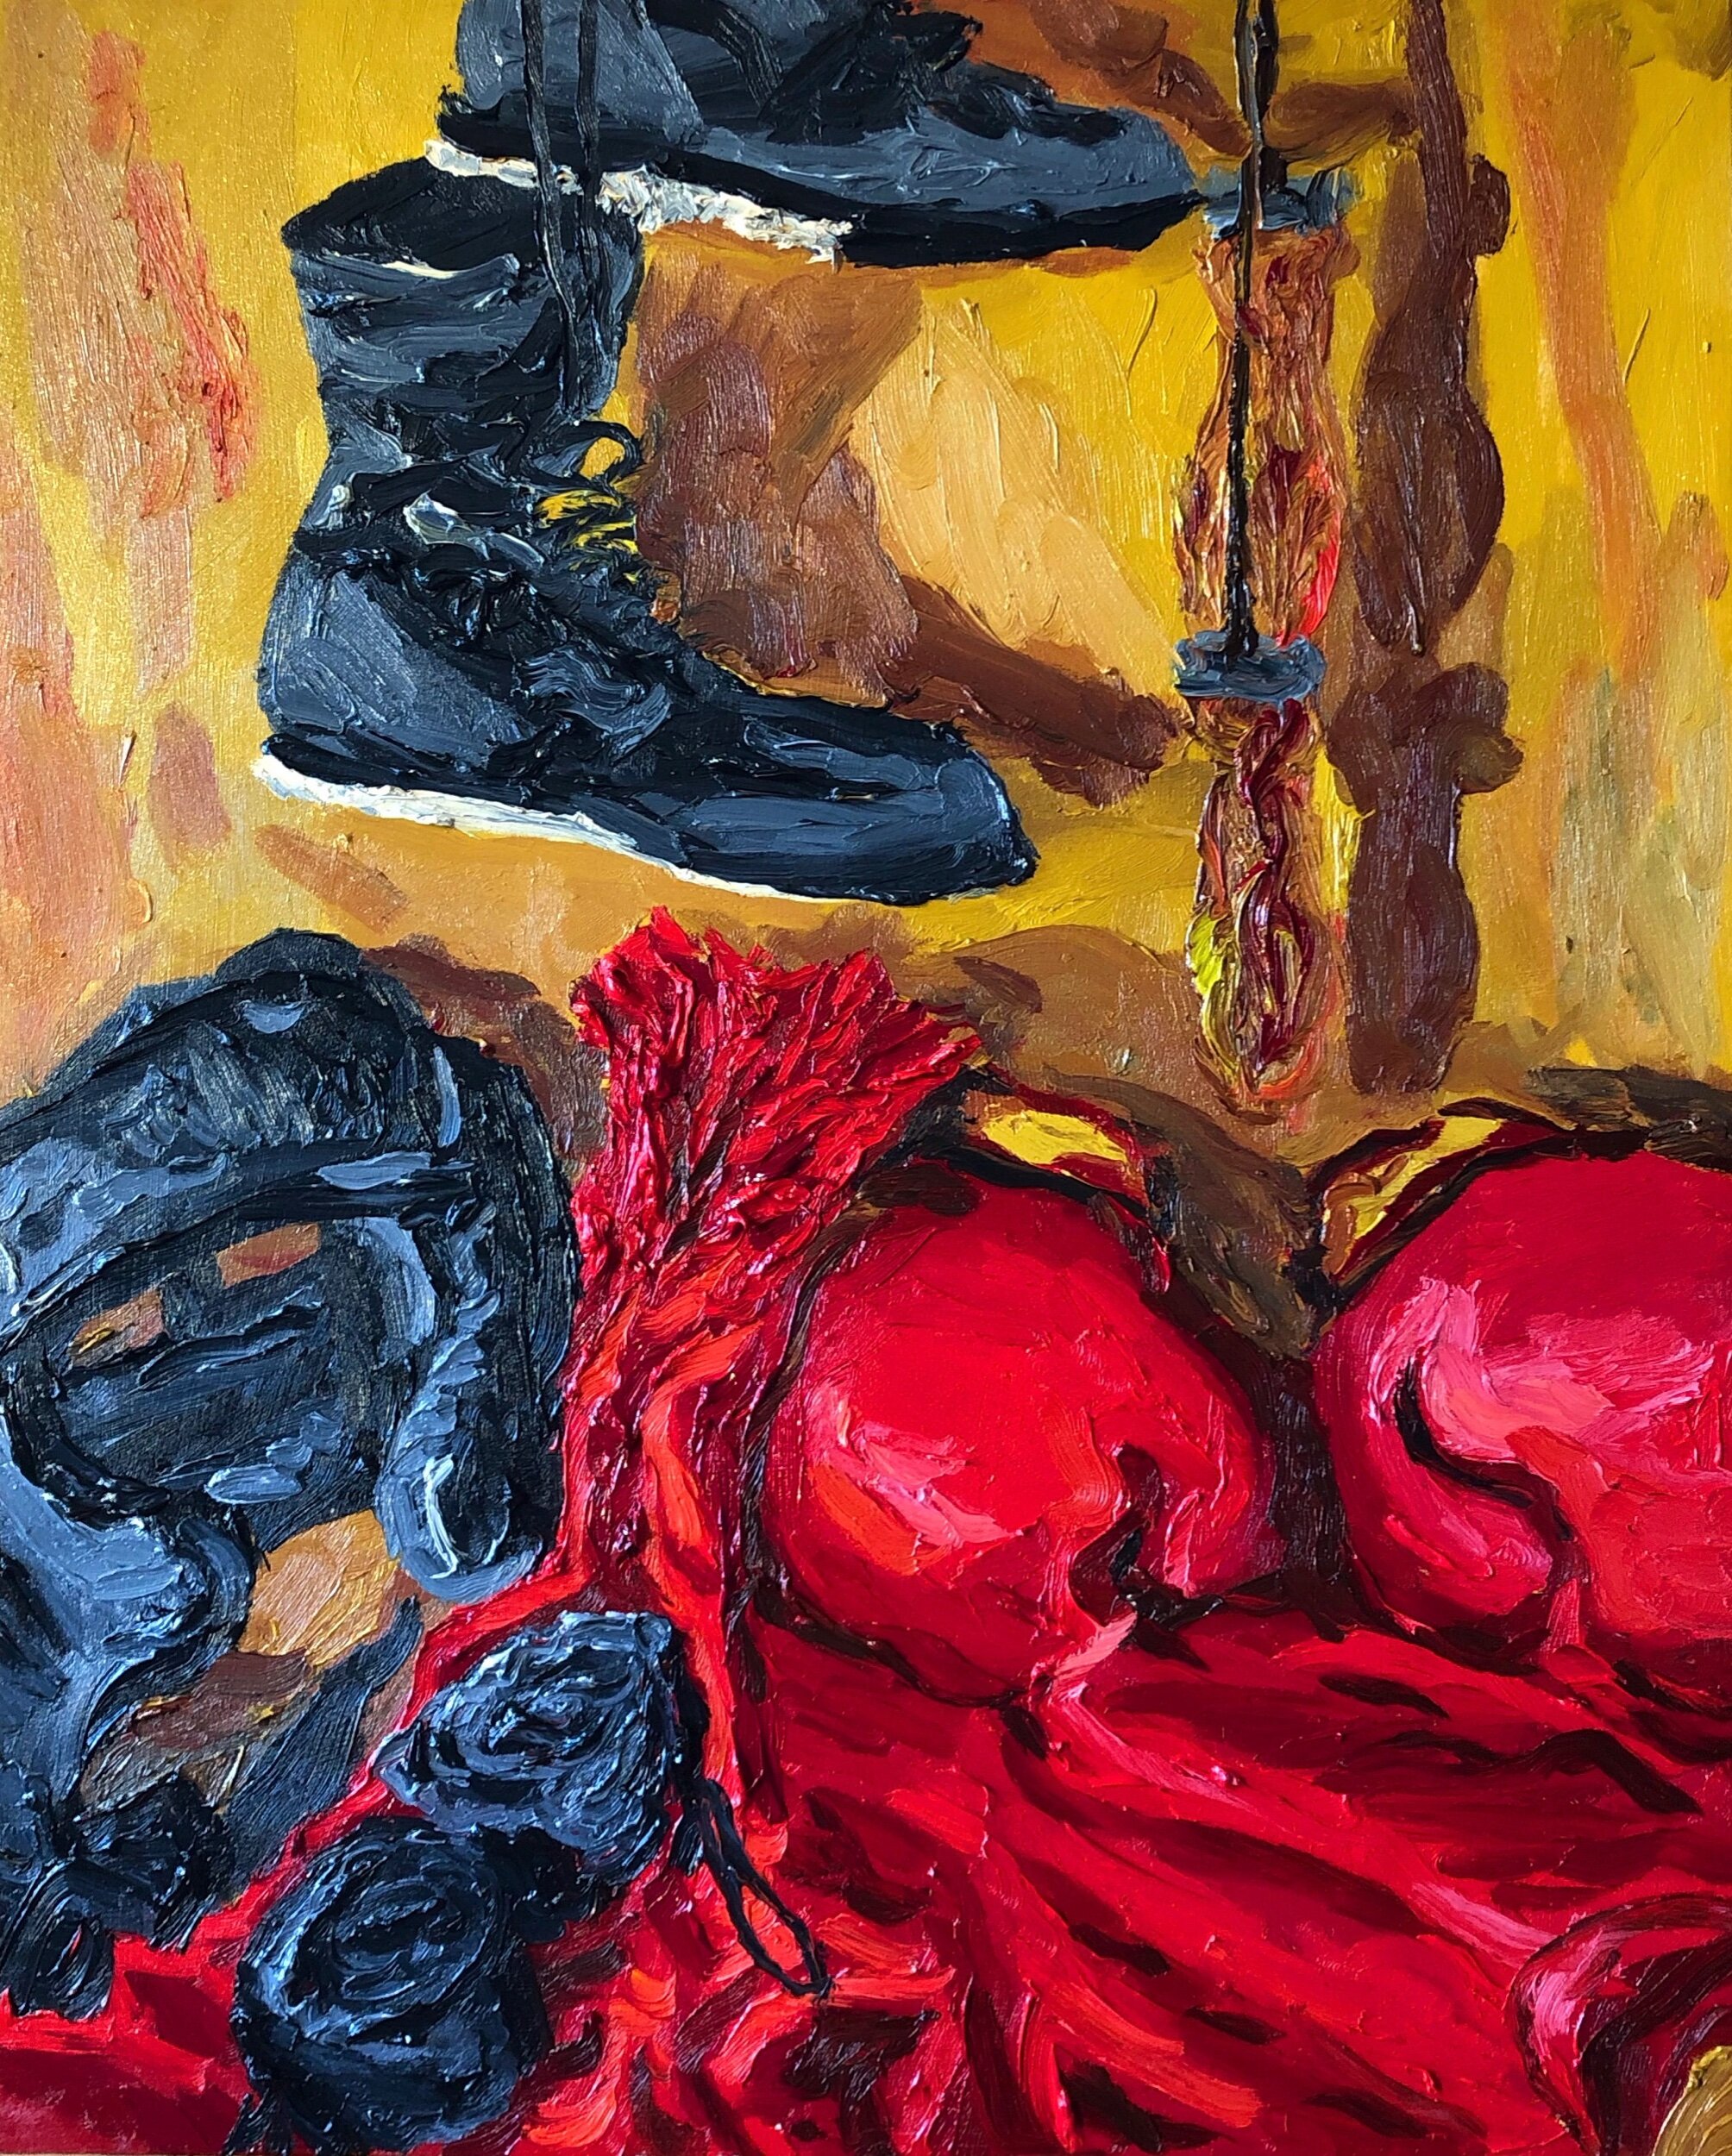 “For the New Bed Stuy Boxing Center” 39 x 31”